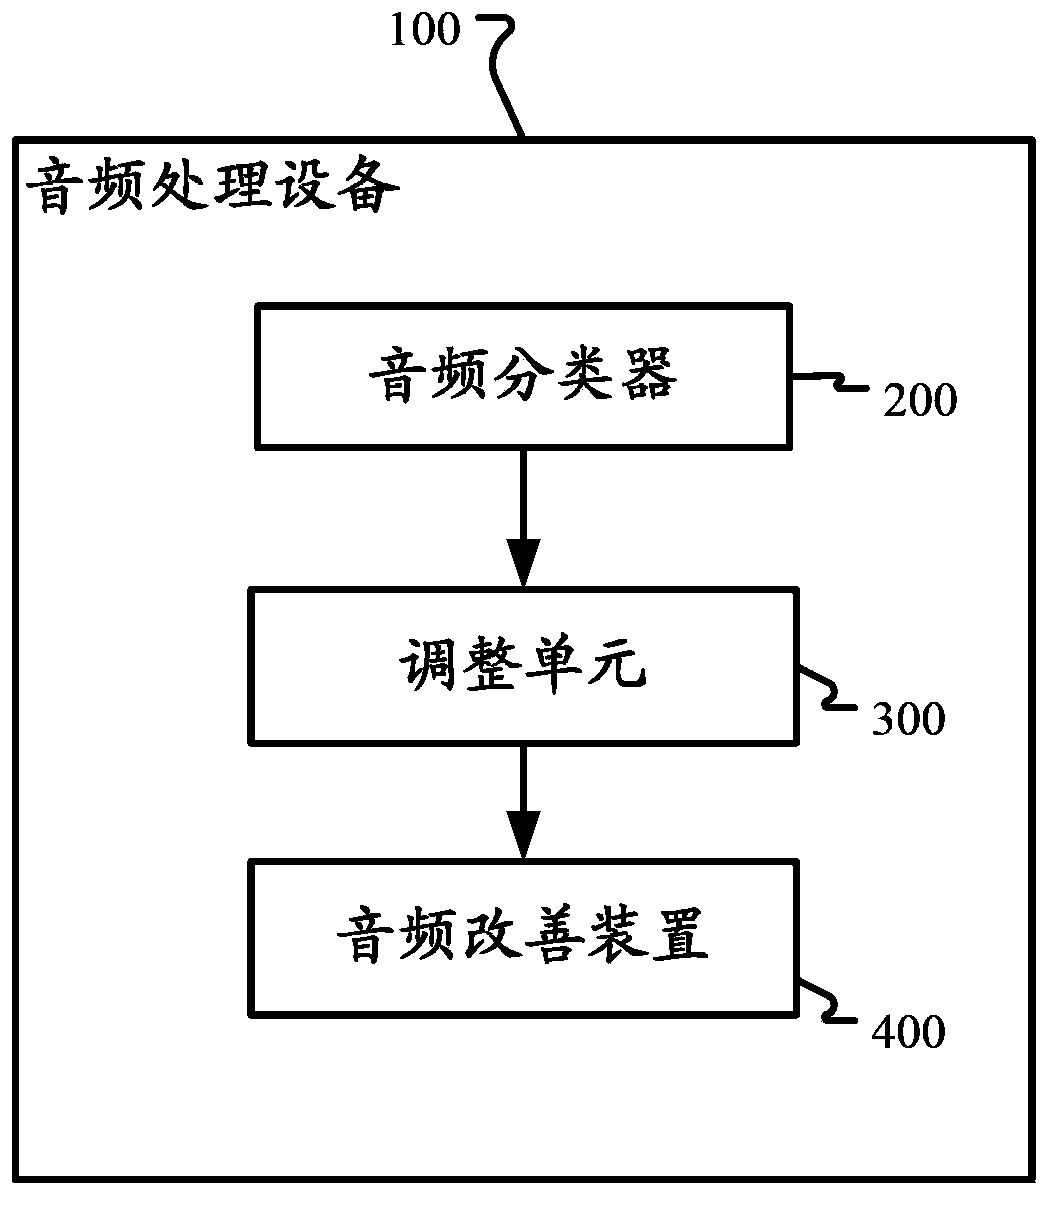 Device and method for audio classification and audio processing